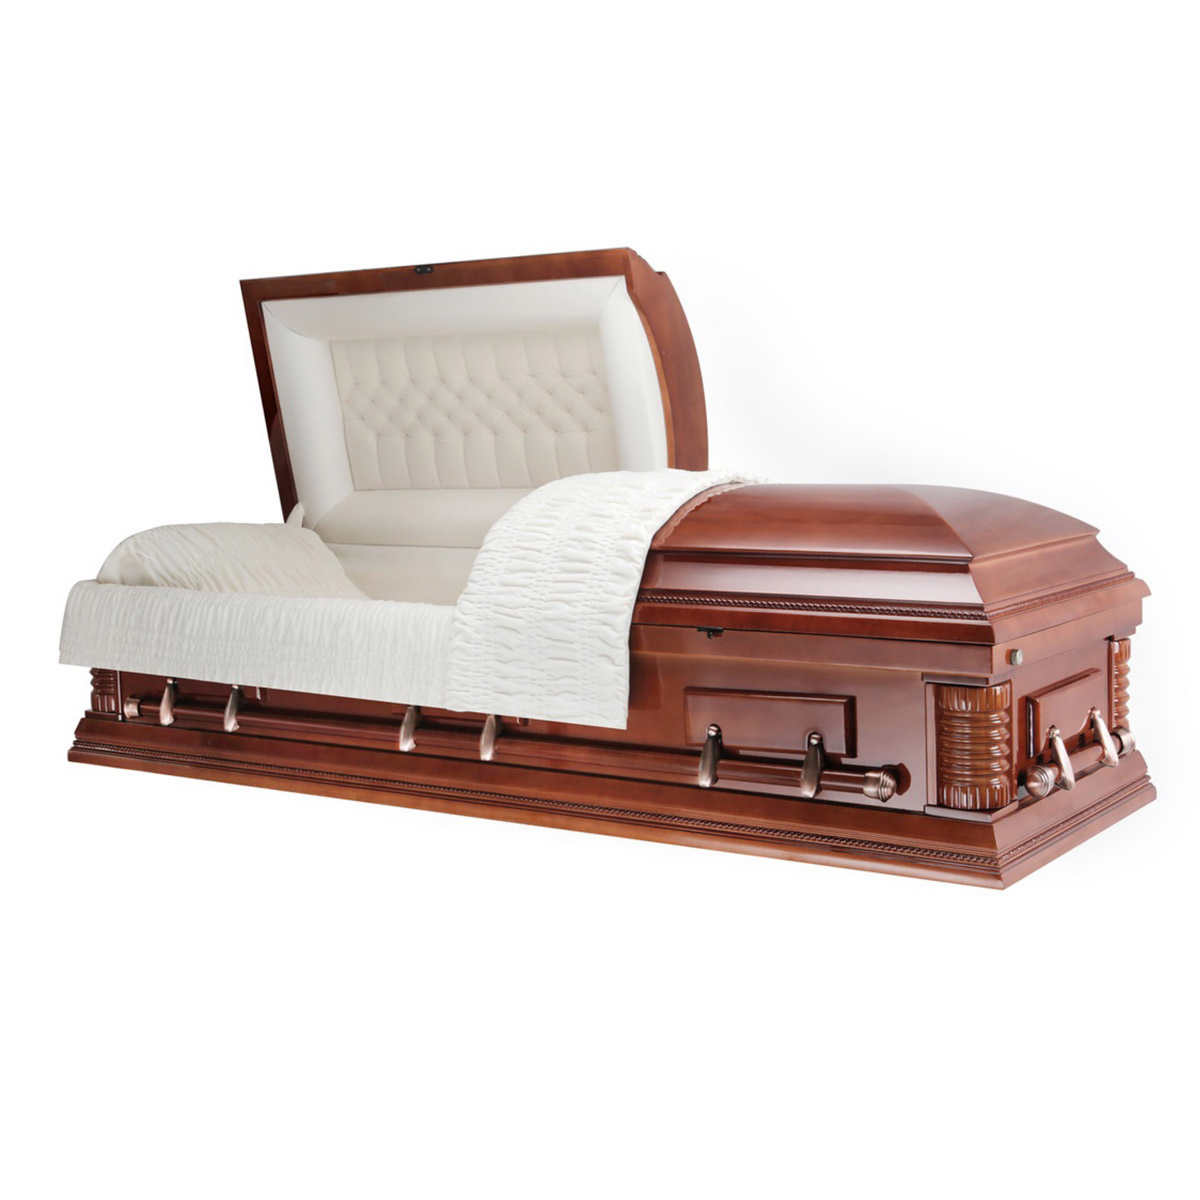 The Hampton Casket By Prime Costco, Casket Bed Frame And Hardware